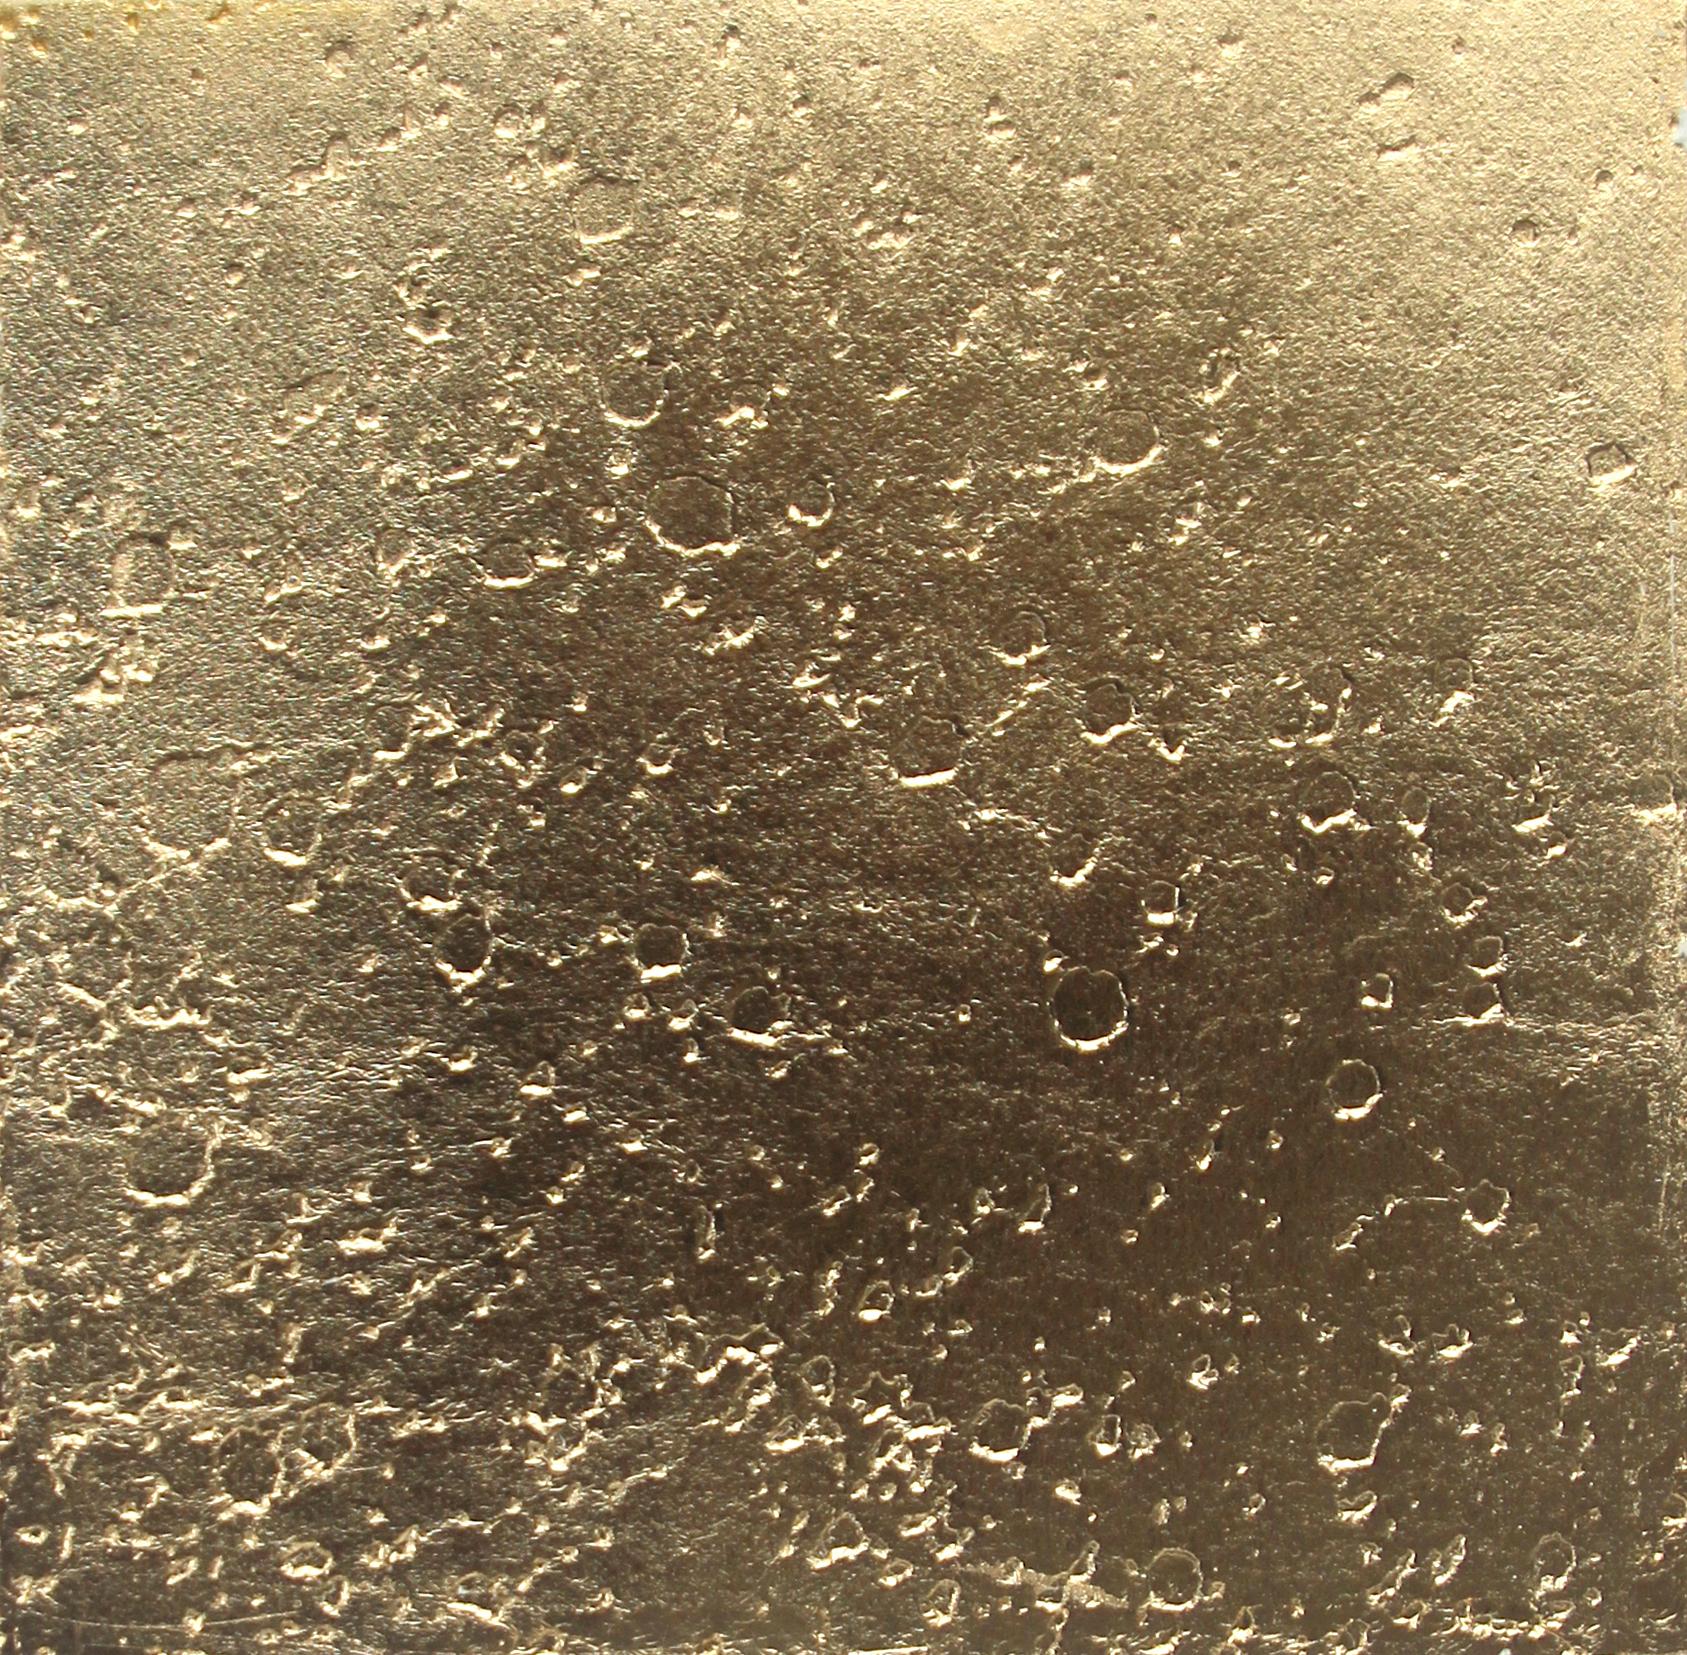 Joy is not made to be a Crumb (Gold): Bubbles in the Sand, Hand-Pulled Etching - Conceptual Print by Jayne Wilton